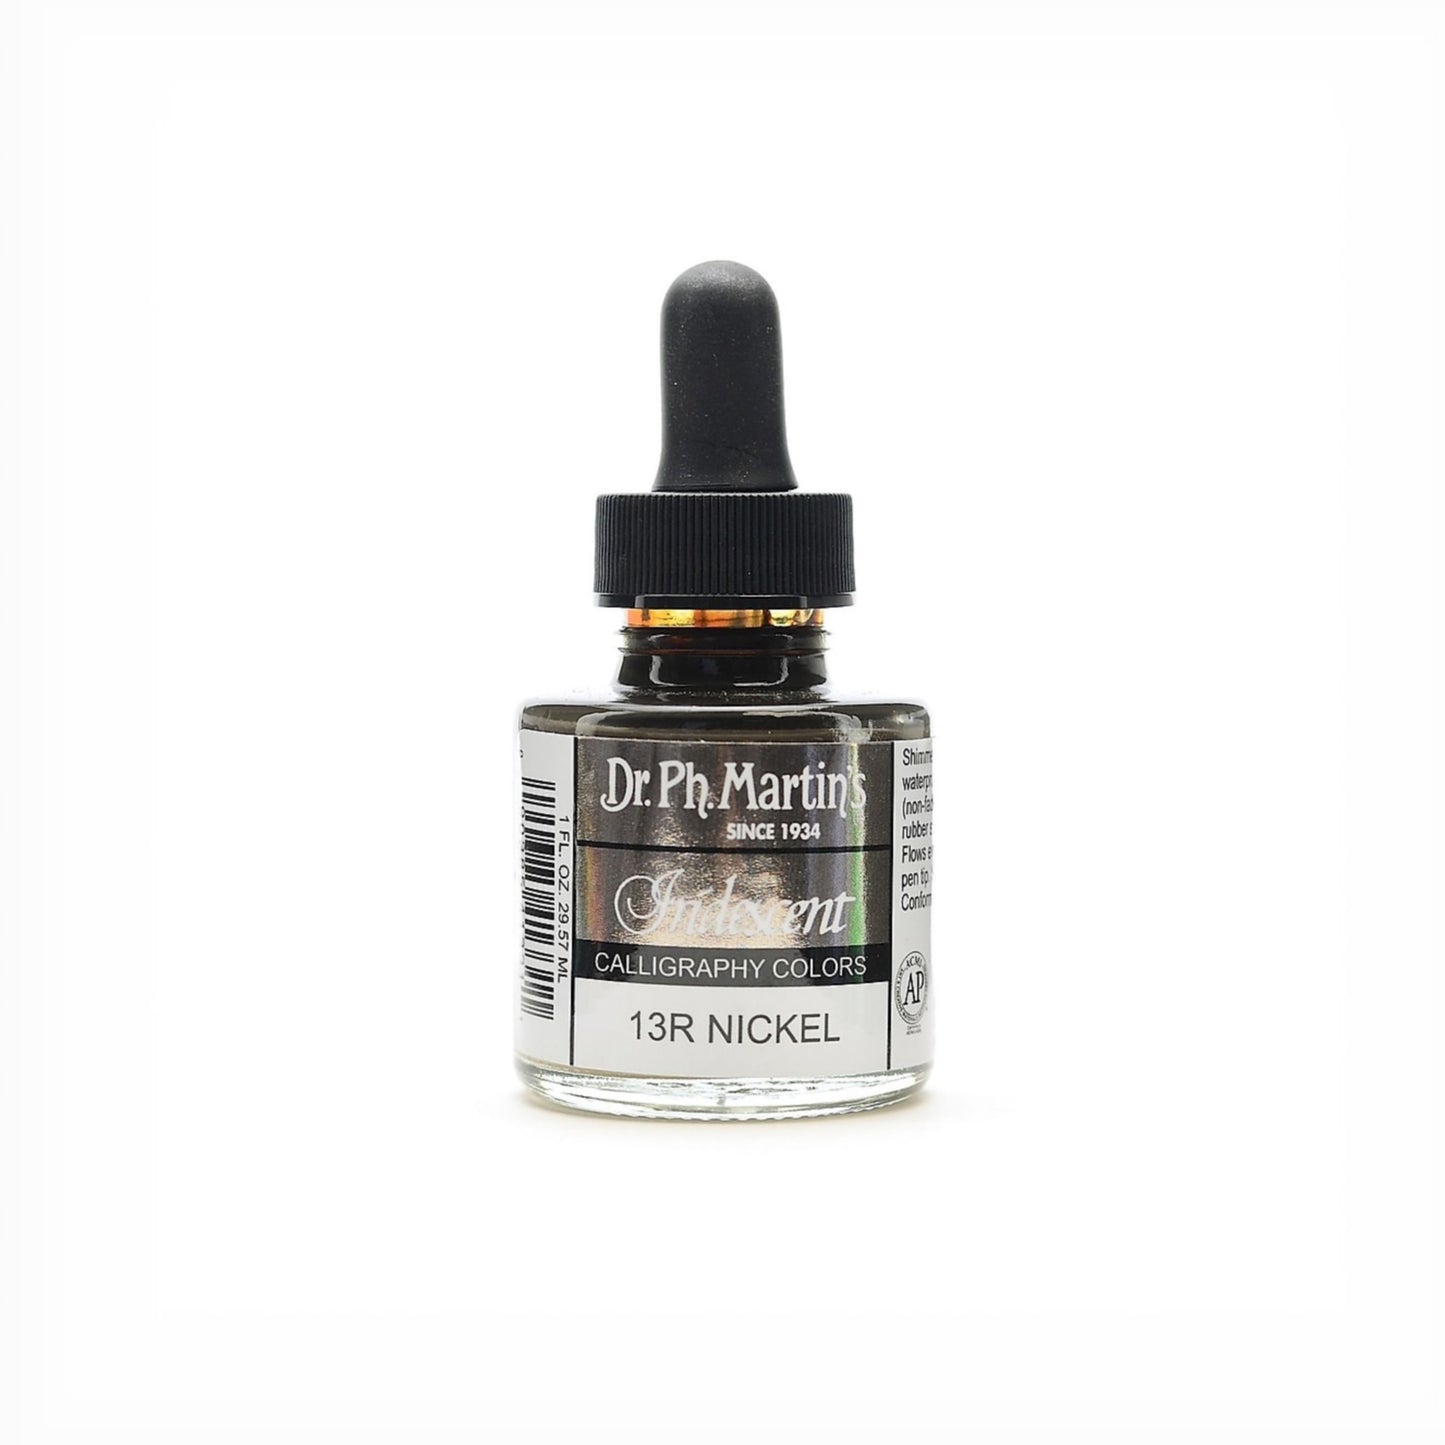 Dr. Ph. Martin's Iridescent Calligraphy Colors - Nickel by Dr. Ph. Martin’s - K. A. Artist Shop